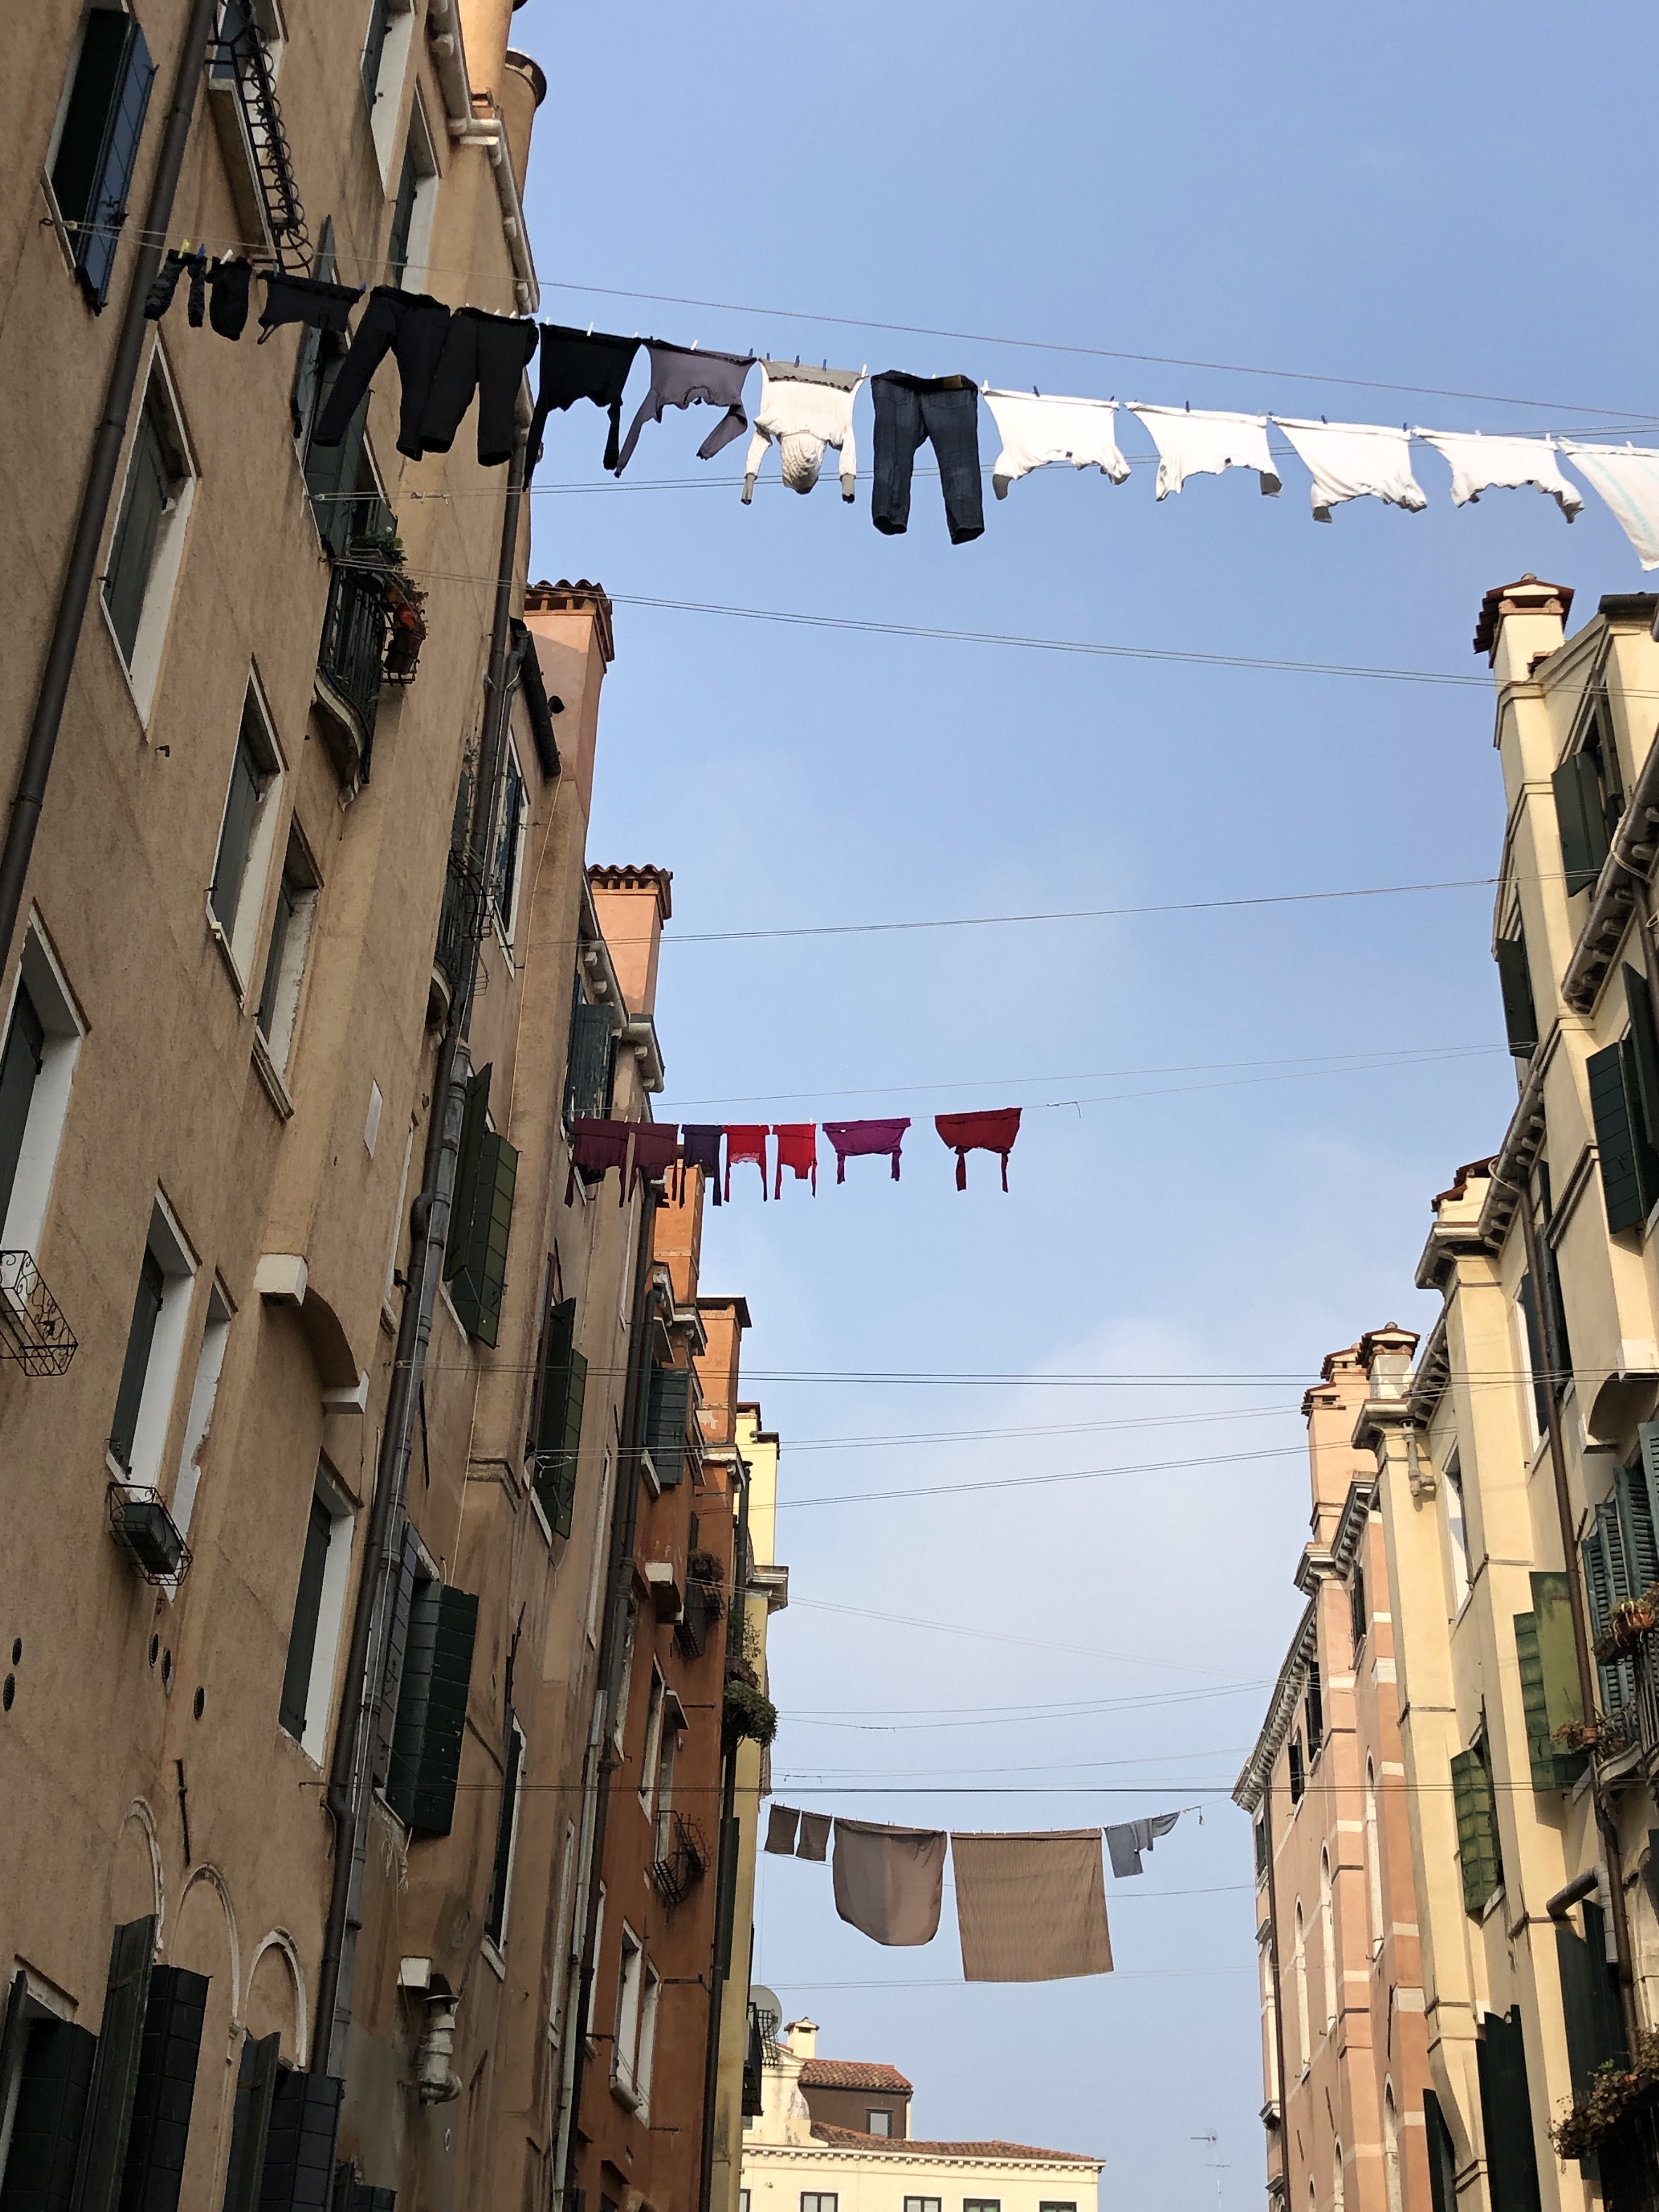 The washing lines span between the buildings, hanging high above the canals of venice